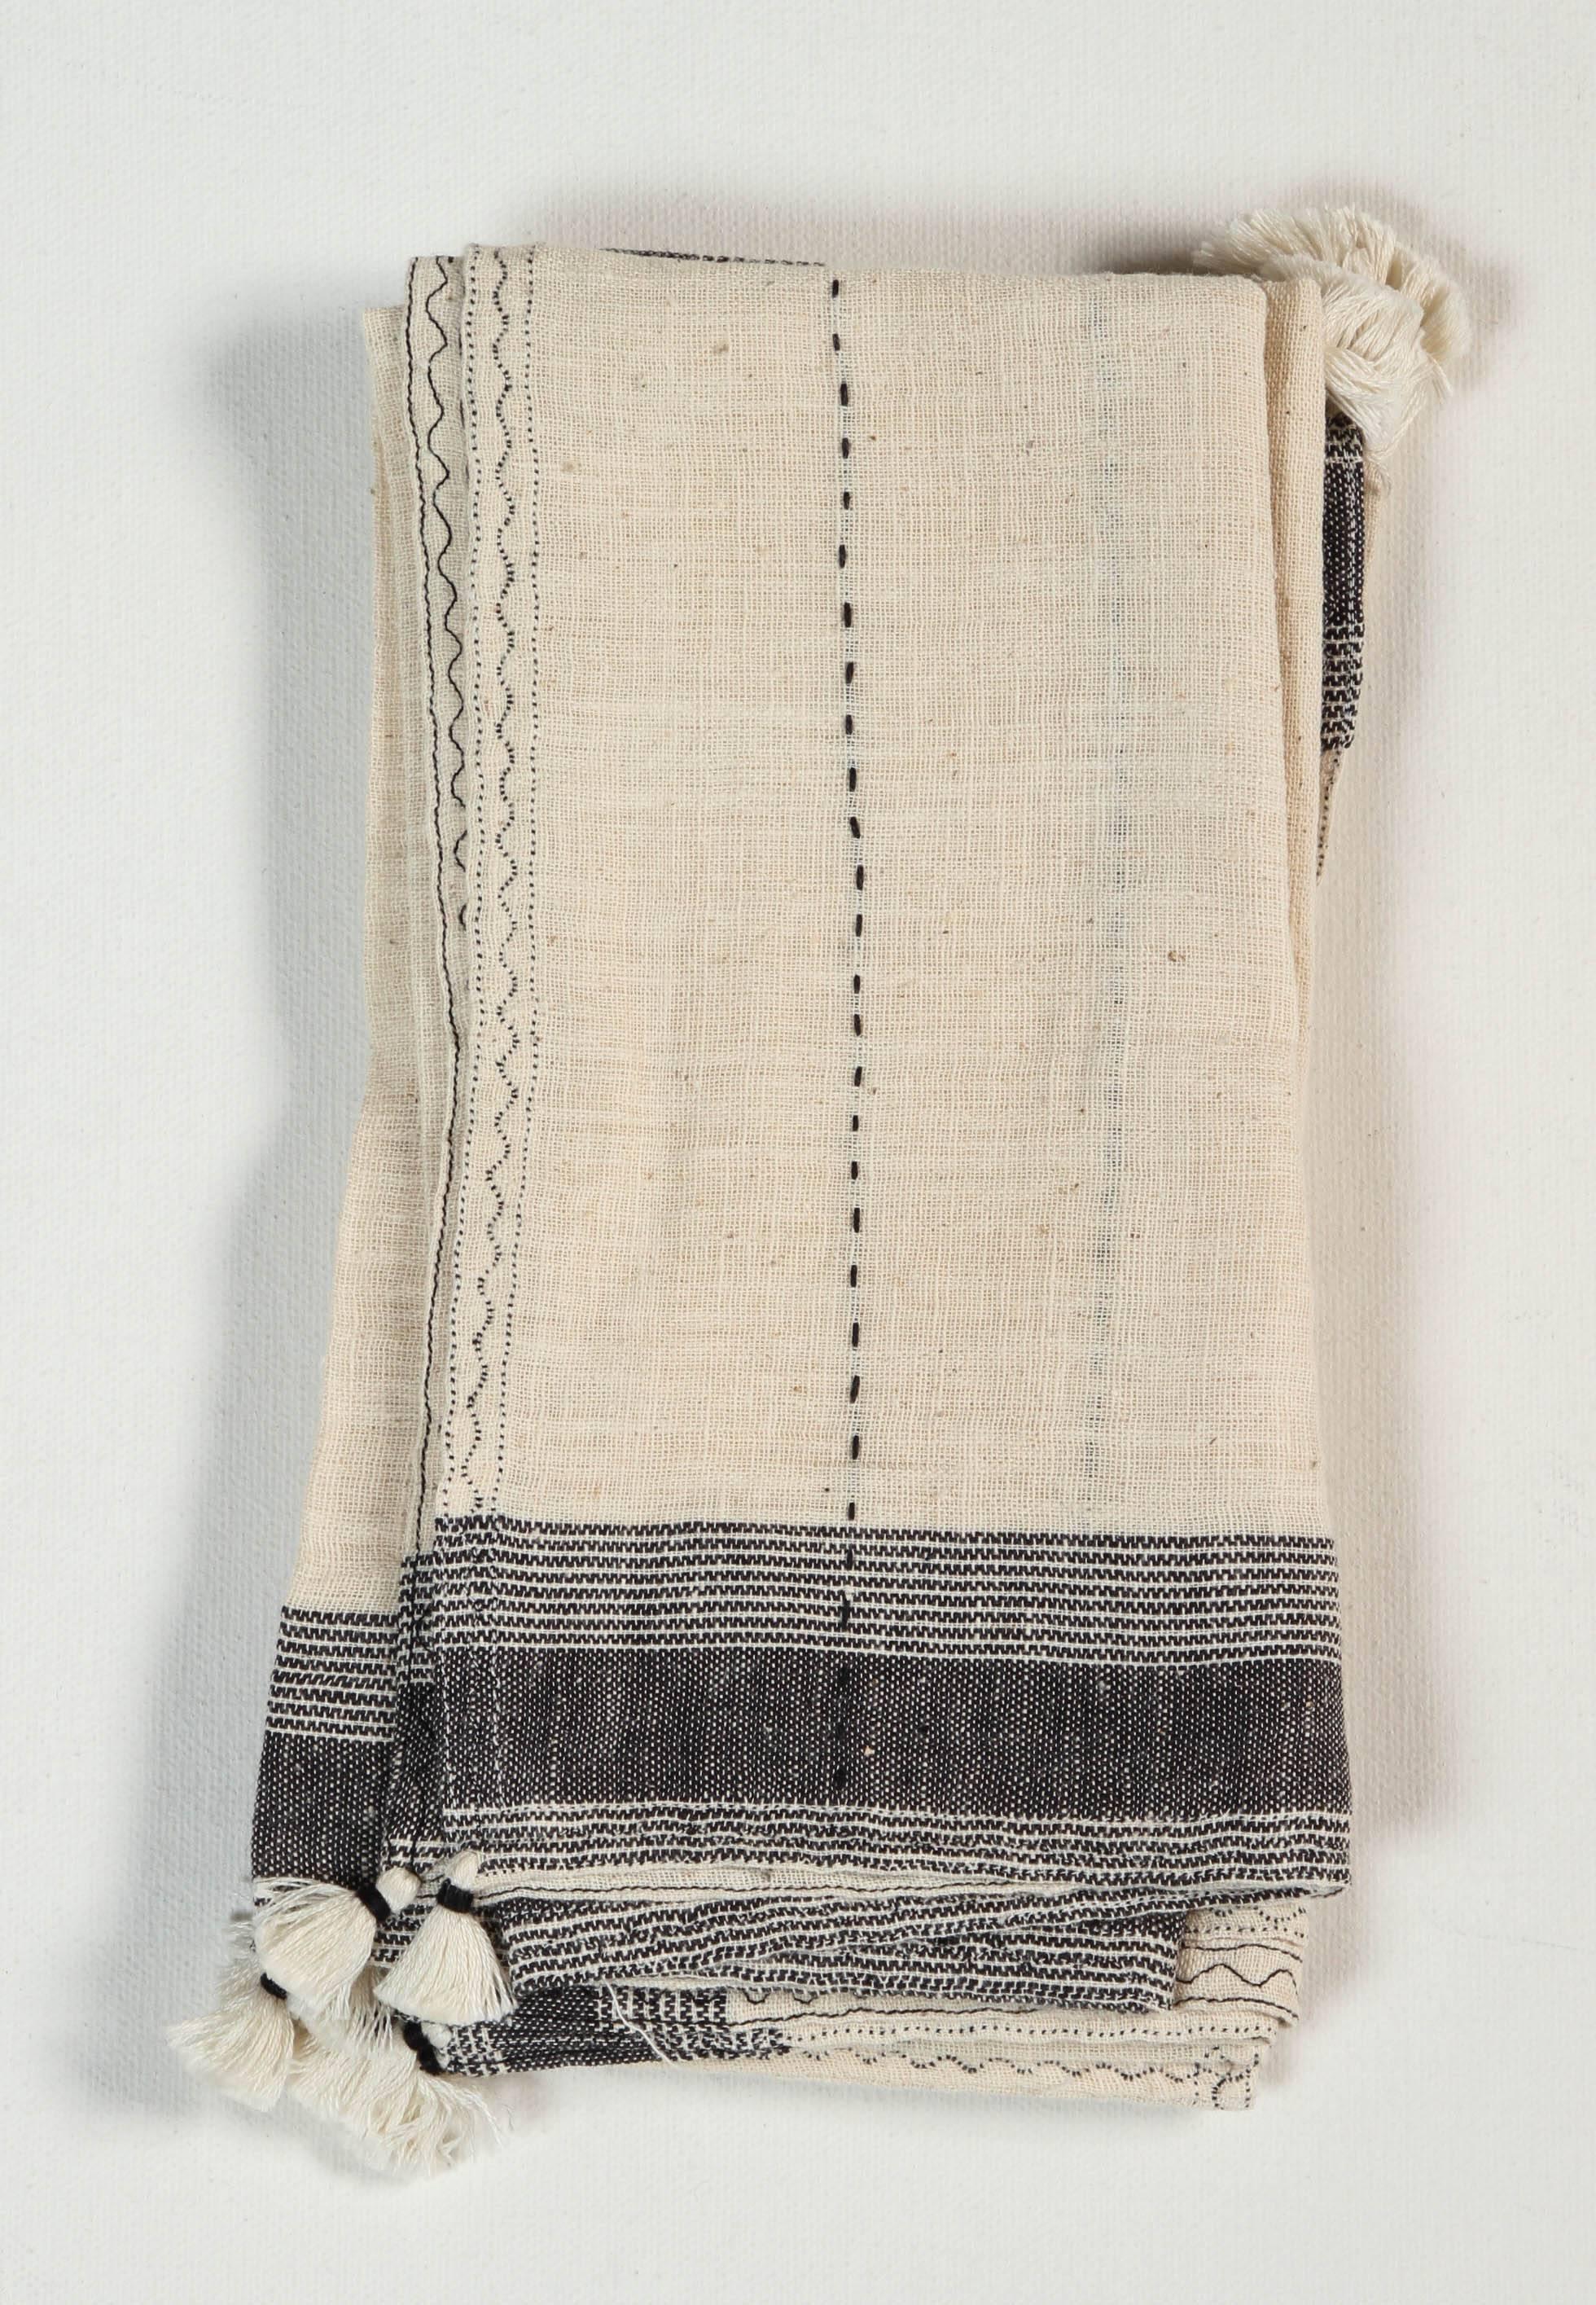 Pat McGann Workshop
Kala naturally dyed organic cotton from Gujarat, India. Hand loomed using traditional Indian textile techniques to produce extra weft woven stripes and plaids. The black and ivory napkins have added hand-knotted tassels. Areas of